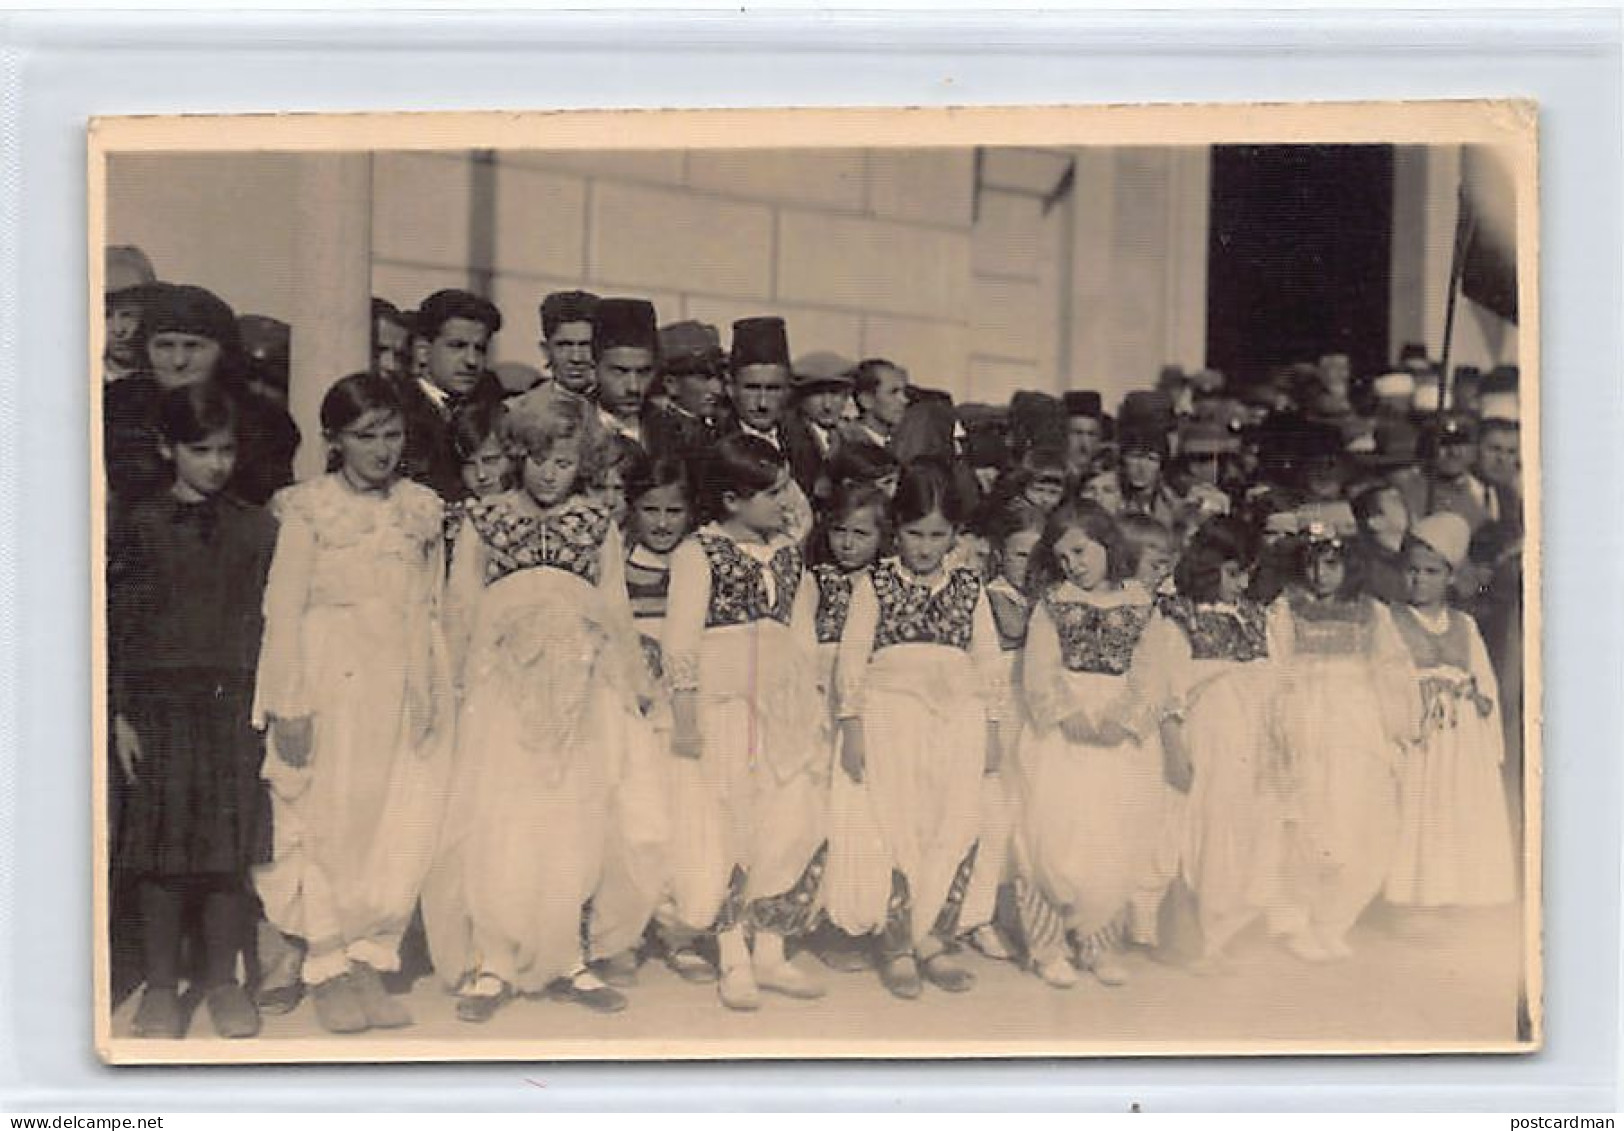 Albania - TIRANA - National Day Parade - Group Of Children In National Costume - REAL PHOTO (circa 1932) - Publ. Agence  - Albanie